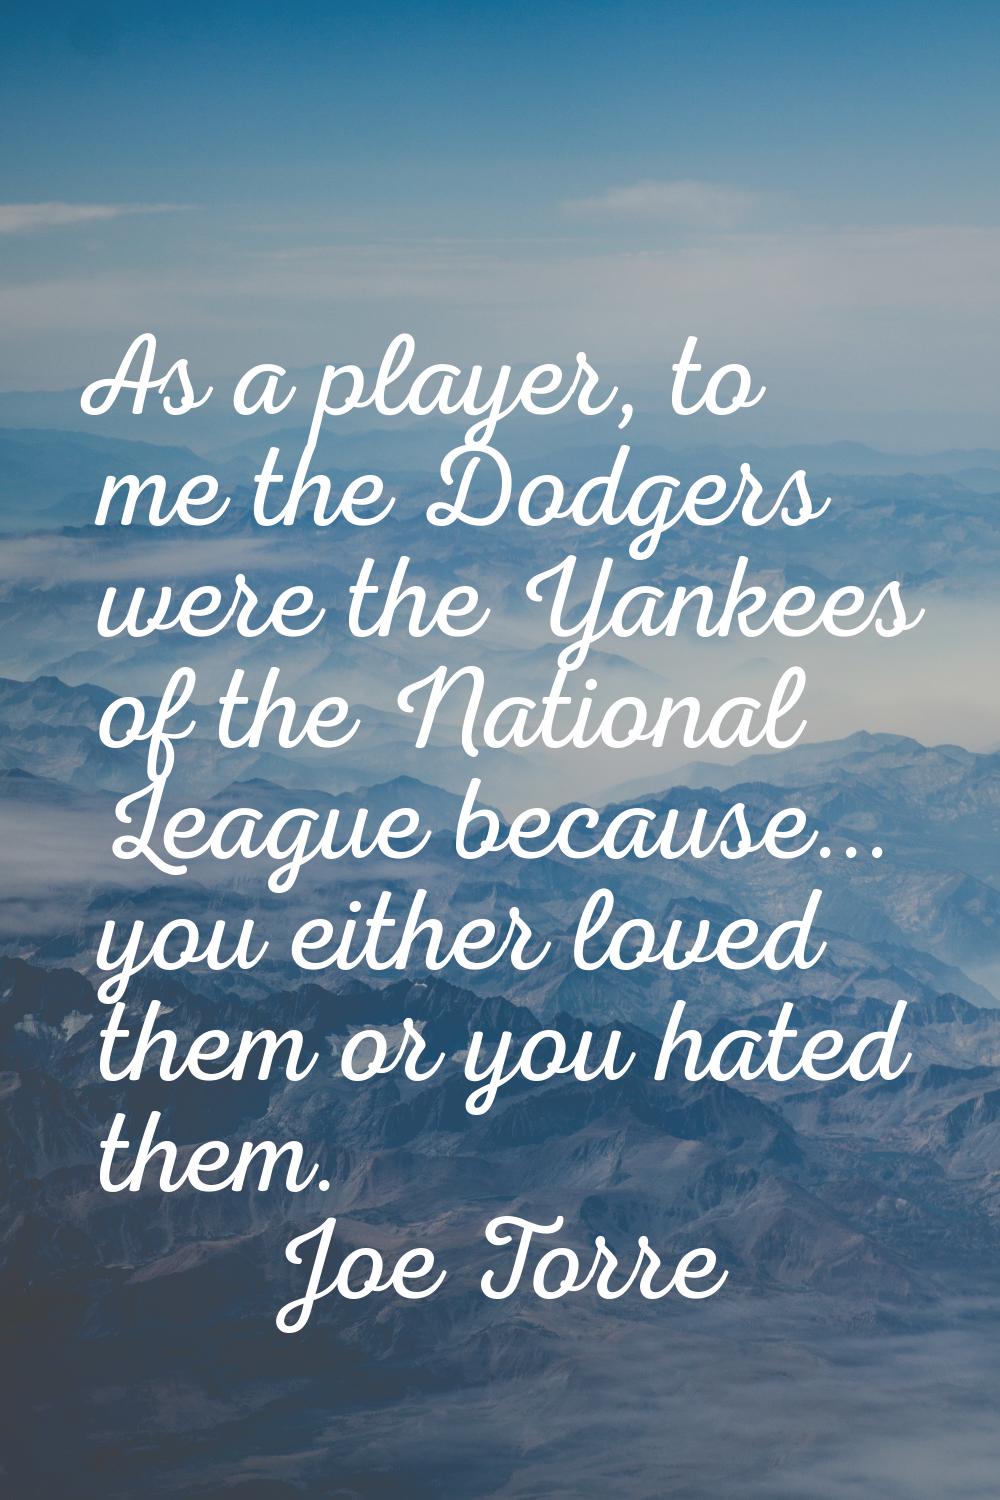 As a player, to me the Dodgers were the Yankees of the National League because... you either loved 